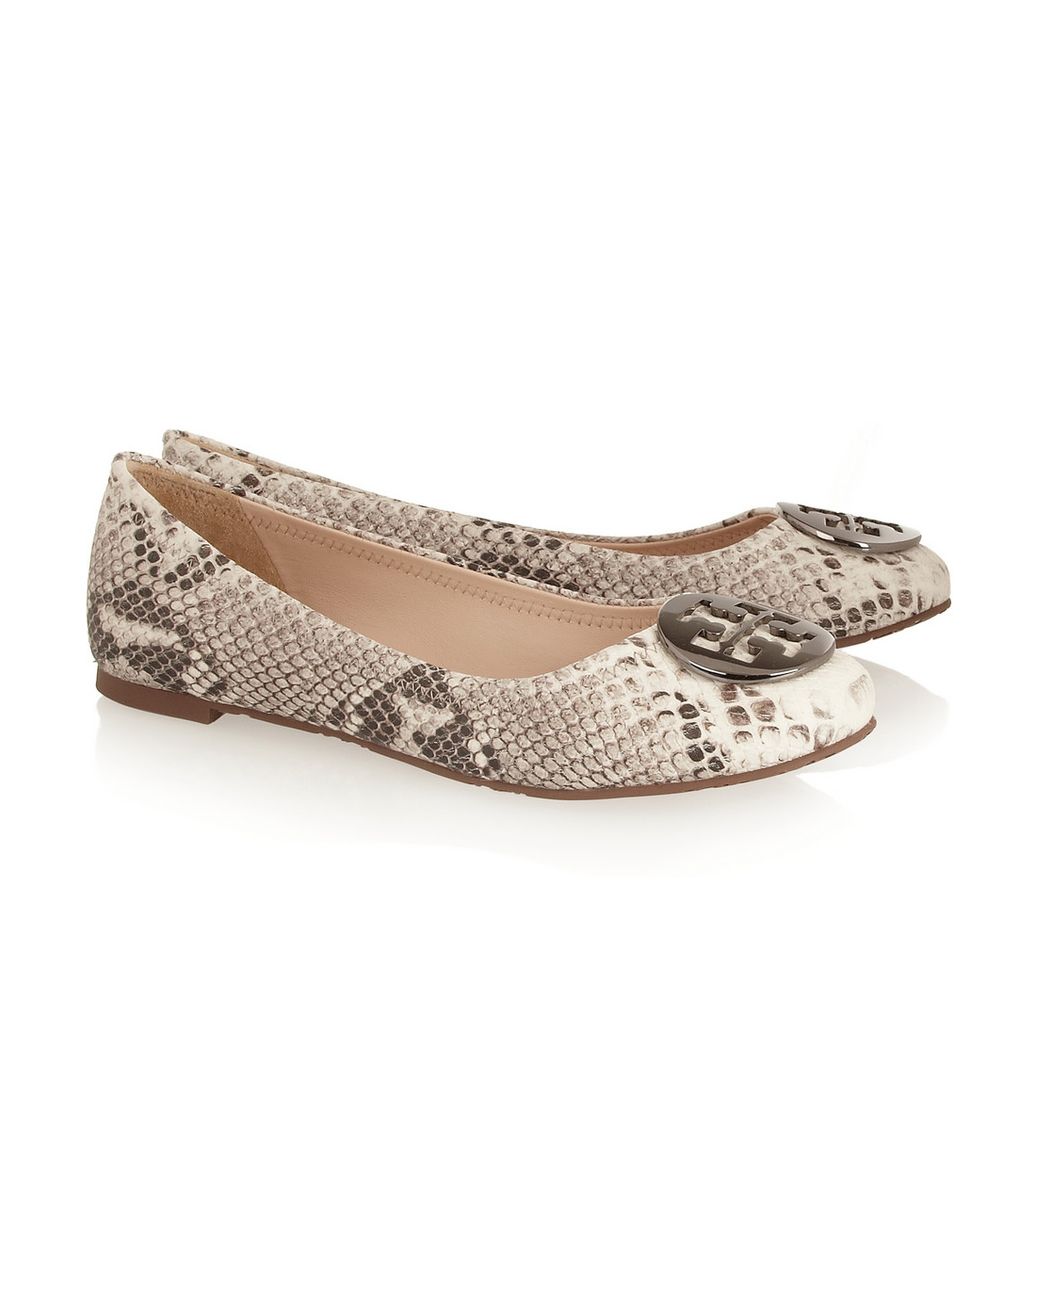 Tory Burch Reva Snake-Effect Leather Ballet Flats in Natural | Lyst